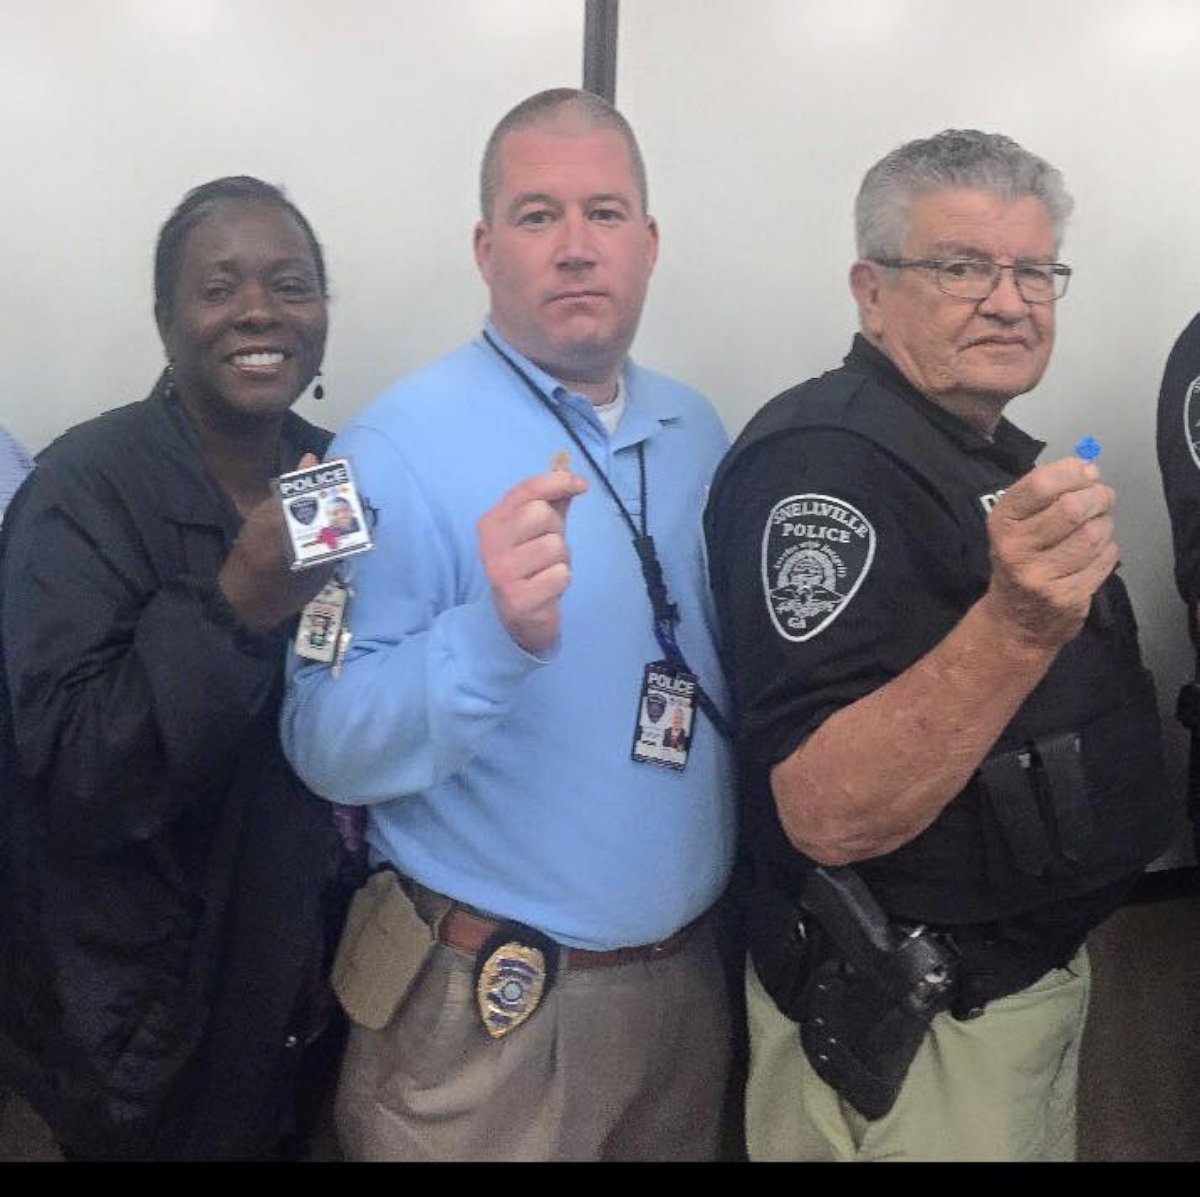 PHOTO: The Snellville Police Department in Snellville, Georgia, received Arianna's handmade crosses a couple of weeks ago.